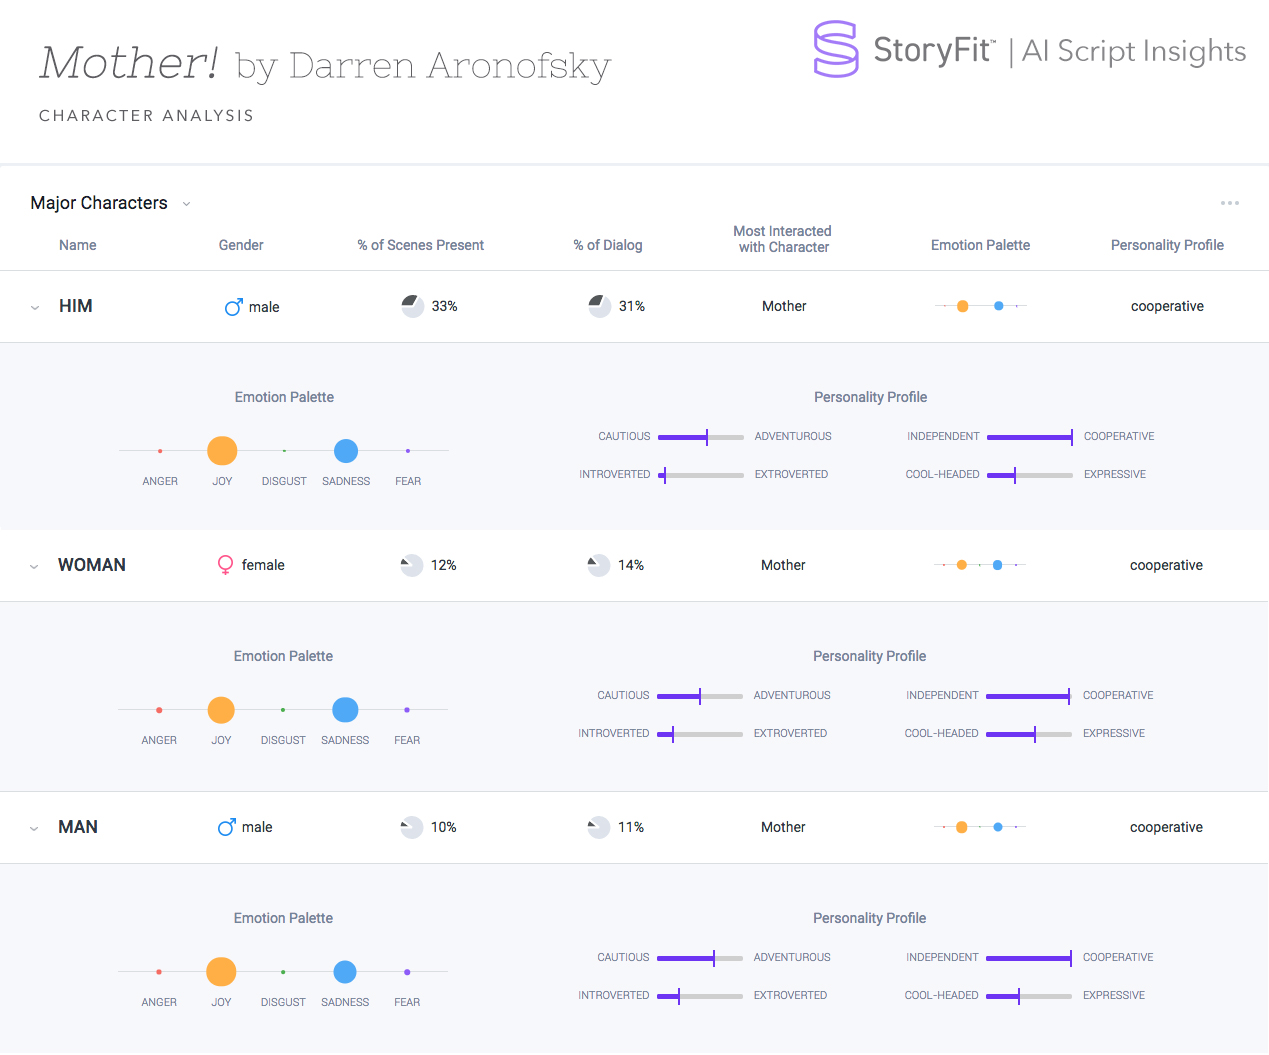 How to use StoryFit AI to analyze movie characters
